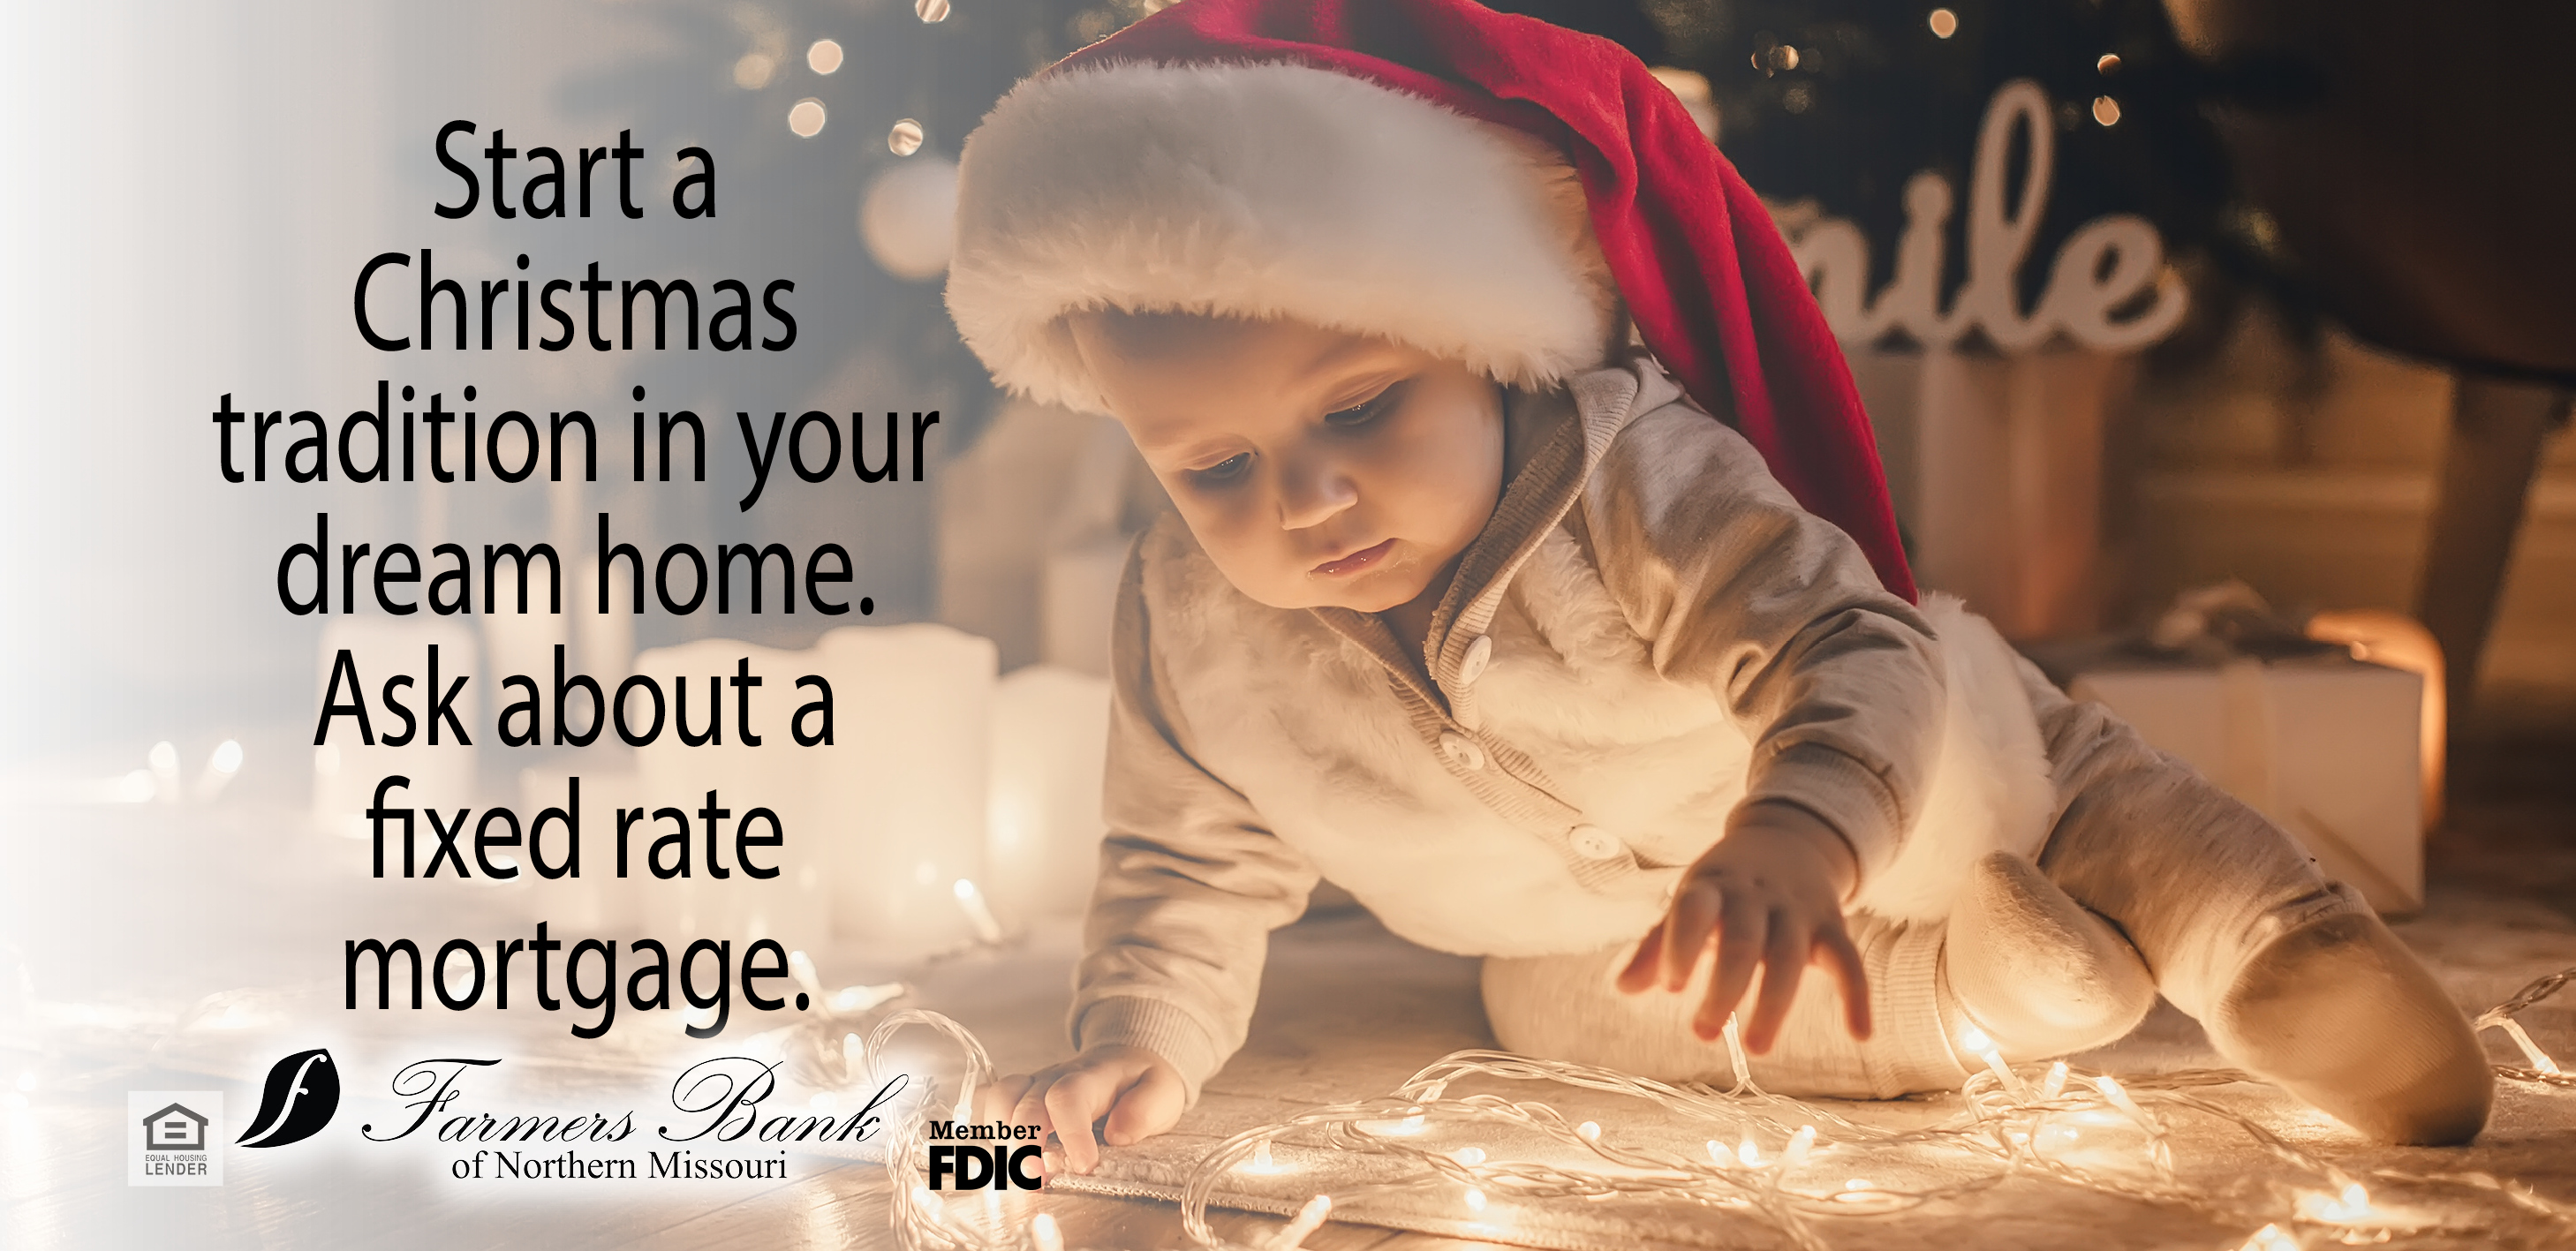 Start a Christmas tradition in your dream home. Ask about a fixed rate mortgage. Farmers Bank of Northern Missouri, member FDIC, equal housing lender